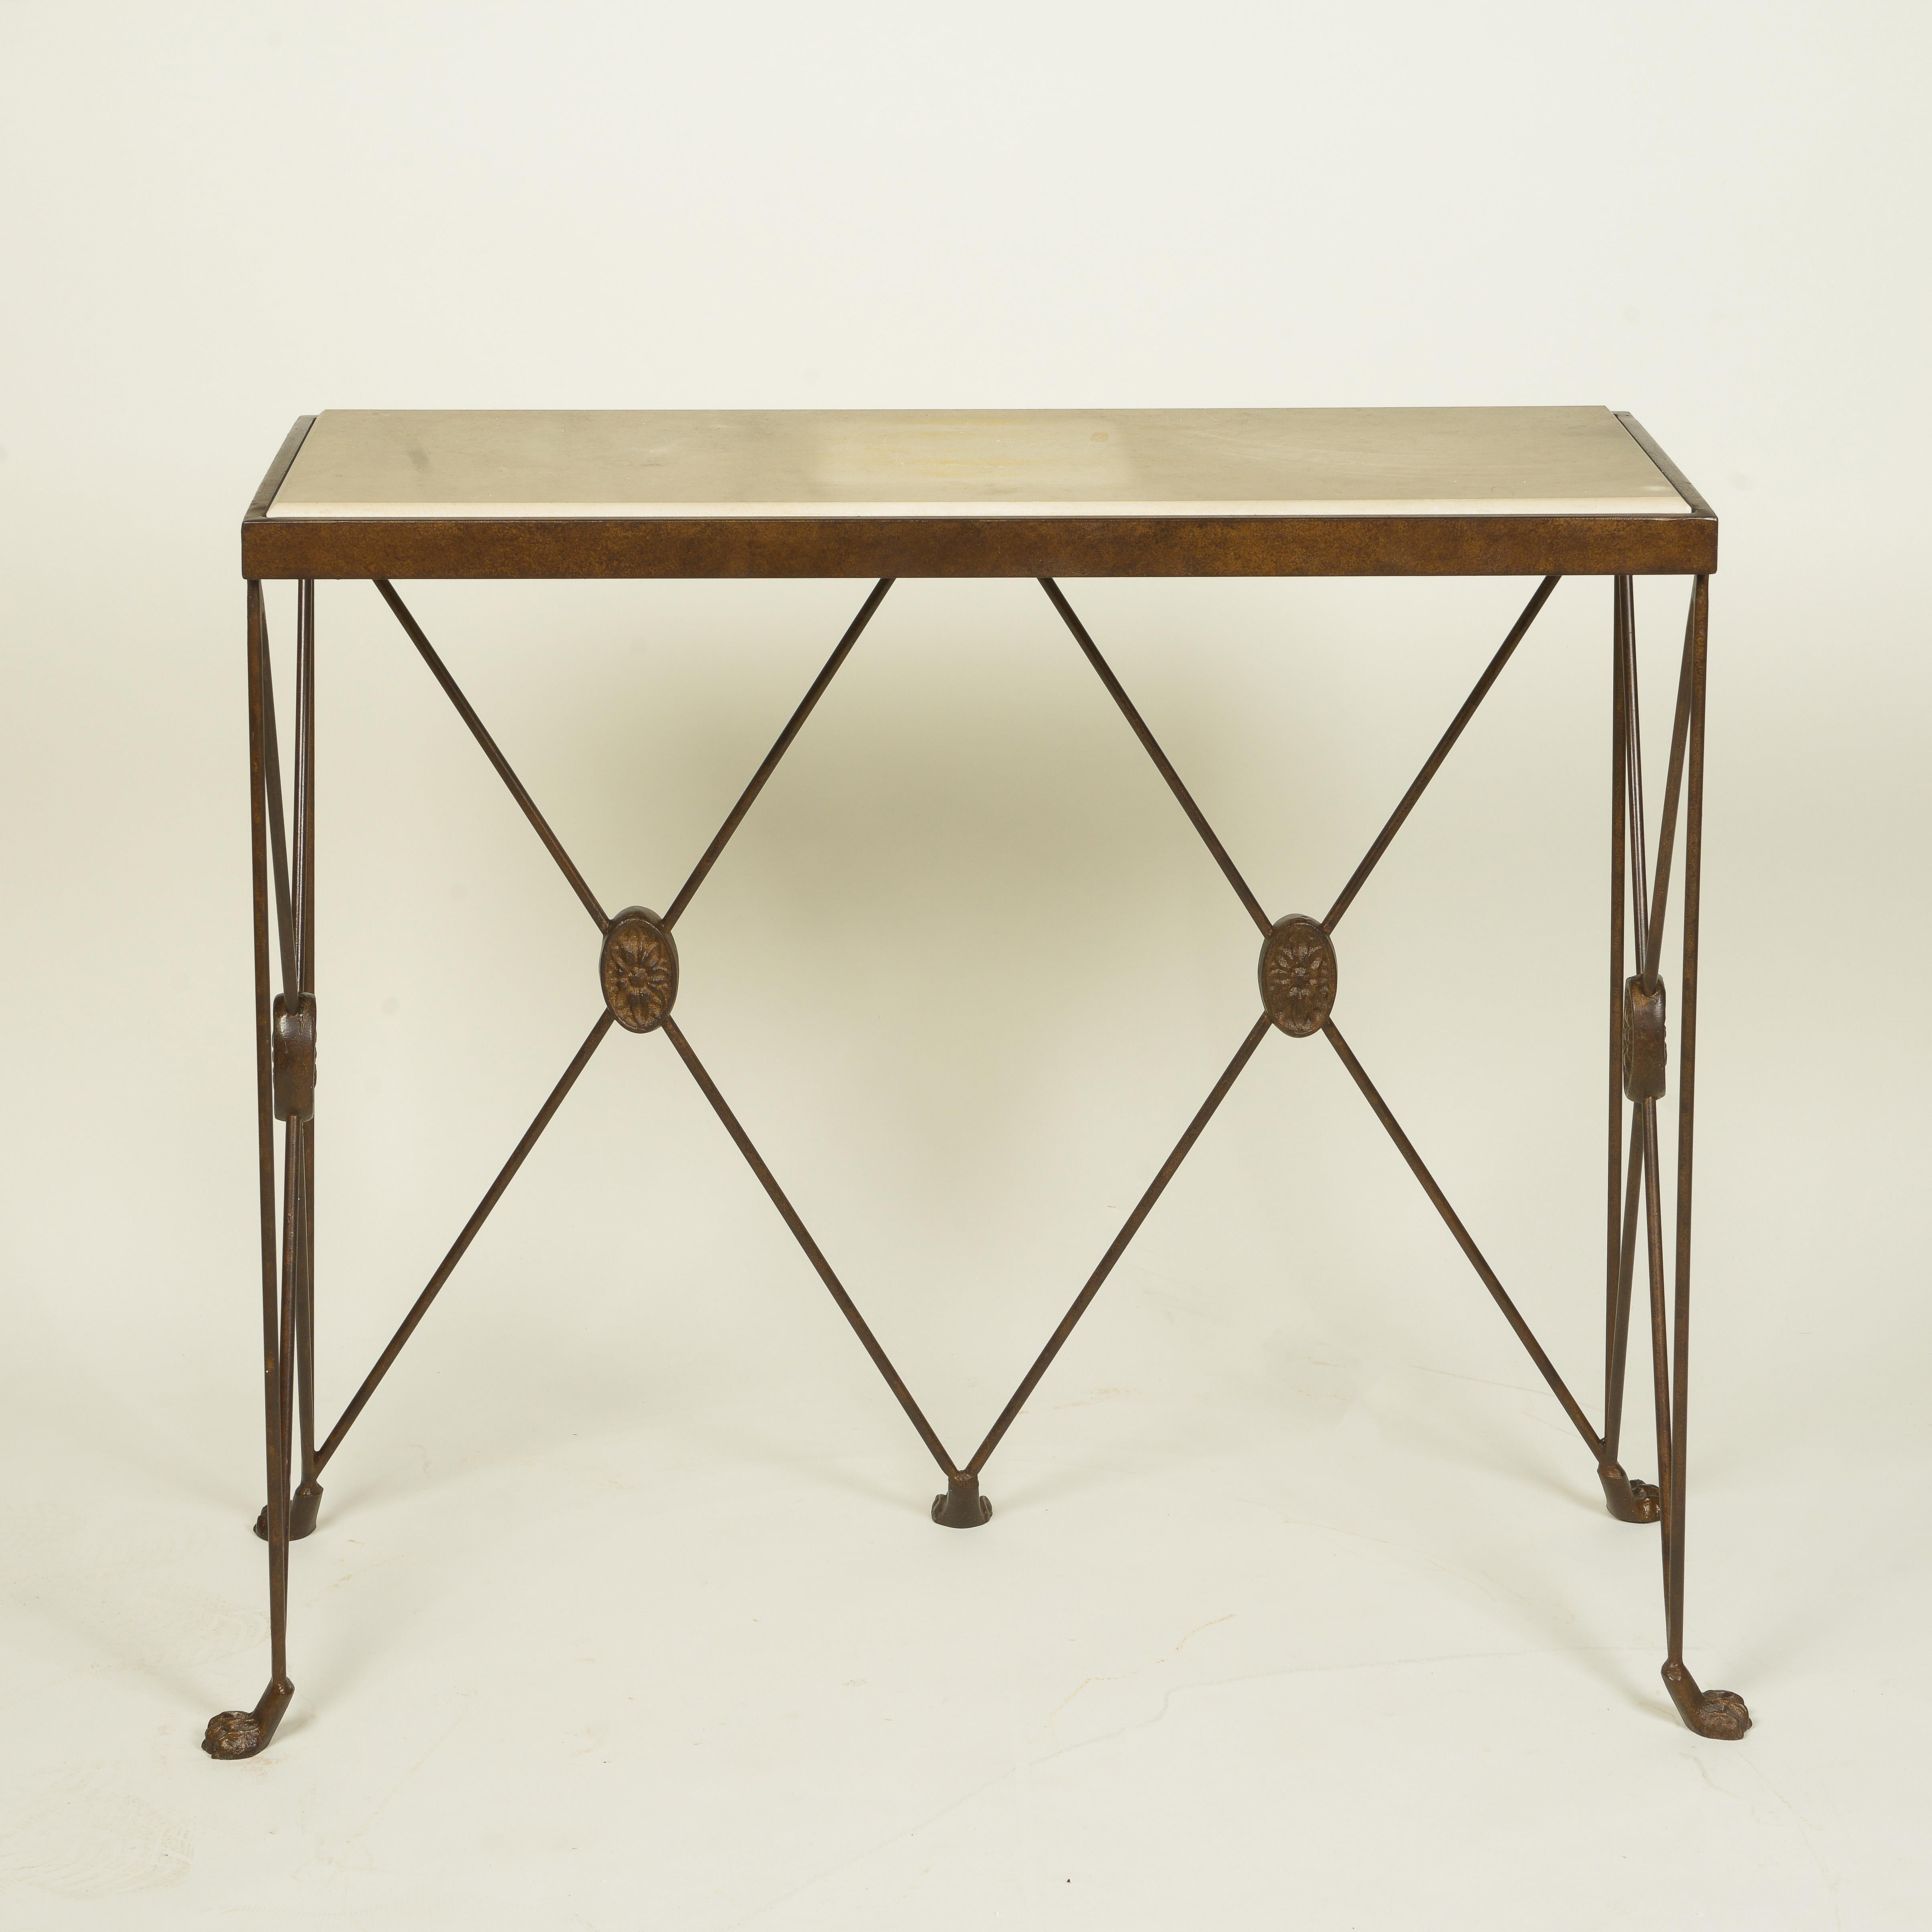 20th Century Neoclassical Marble Top Gilt-Metal Console Table For Sale